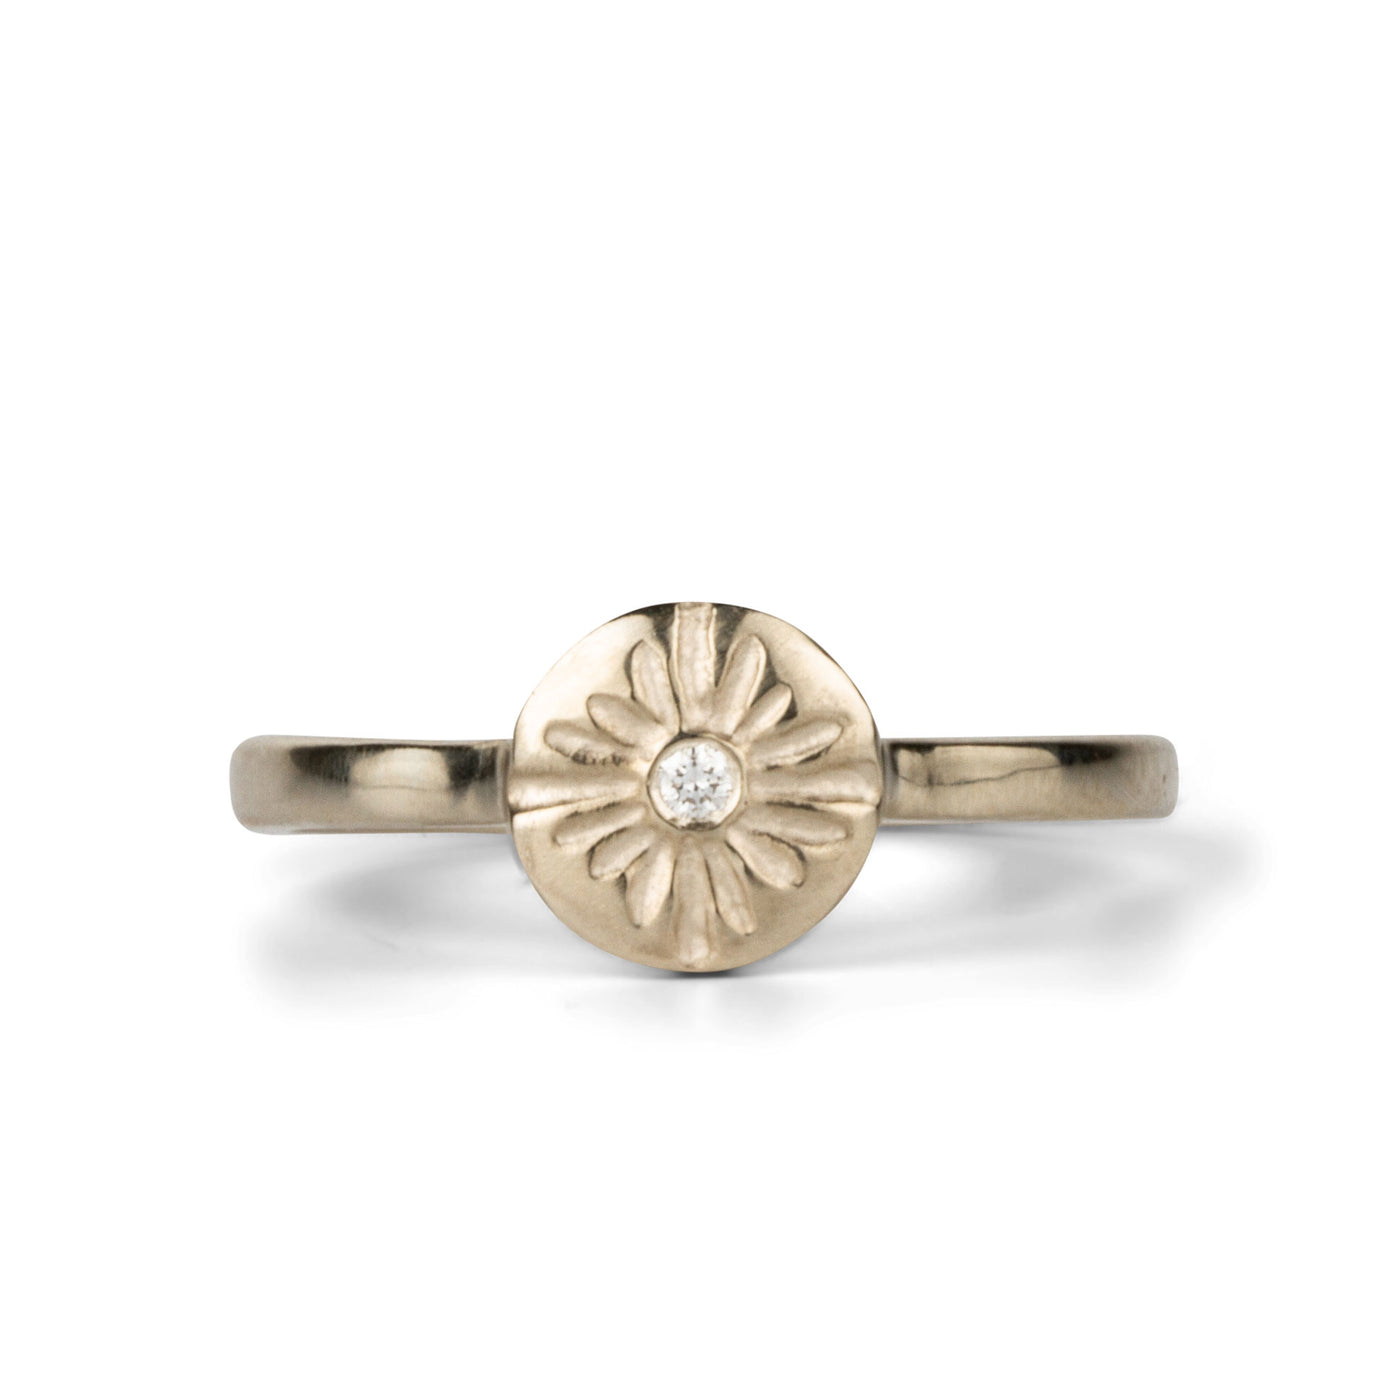 Lucia Small White Gold and Diamond Ring front facing on a white background